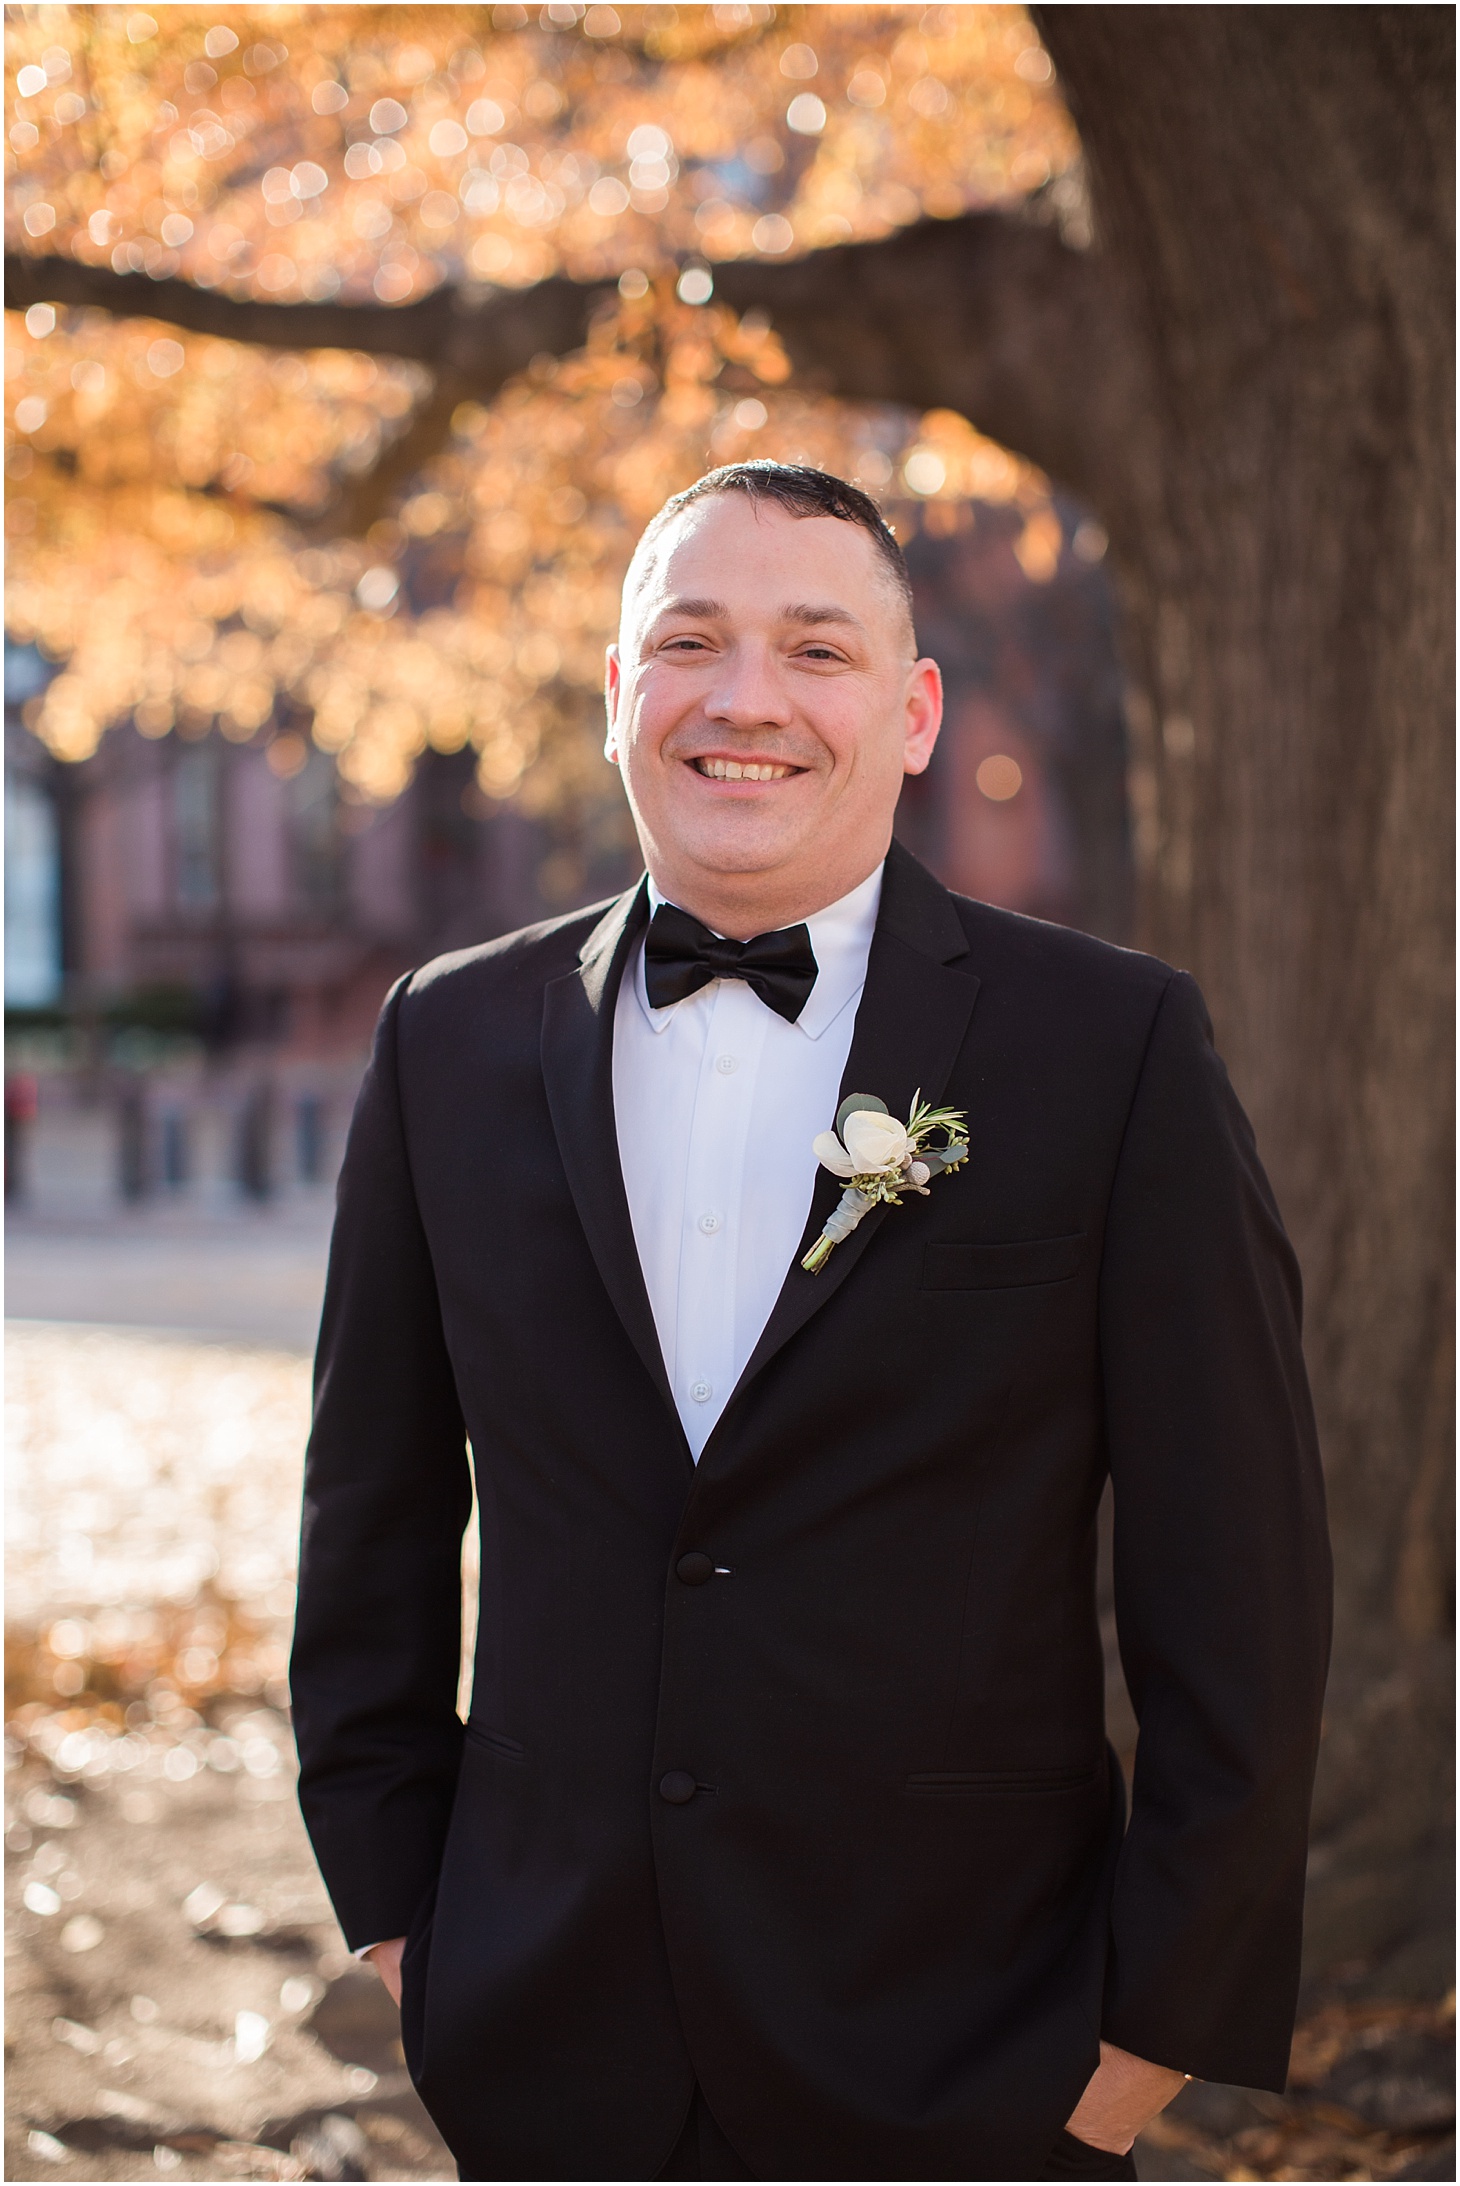 Groom in LaFayette Square | Luxe Winter Wedding at the Army and Navy Club | Sarah Bradshaw Photography | Washington DC Wedding Photographer